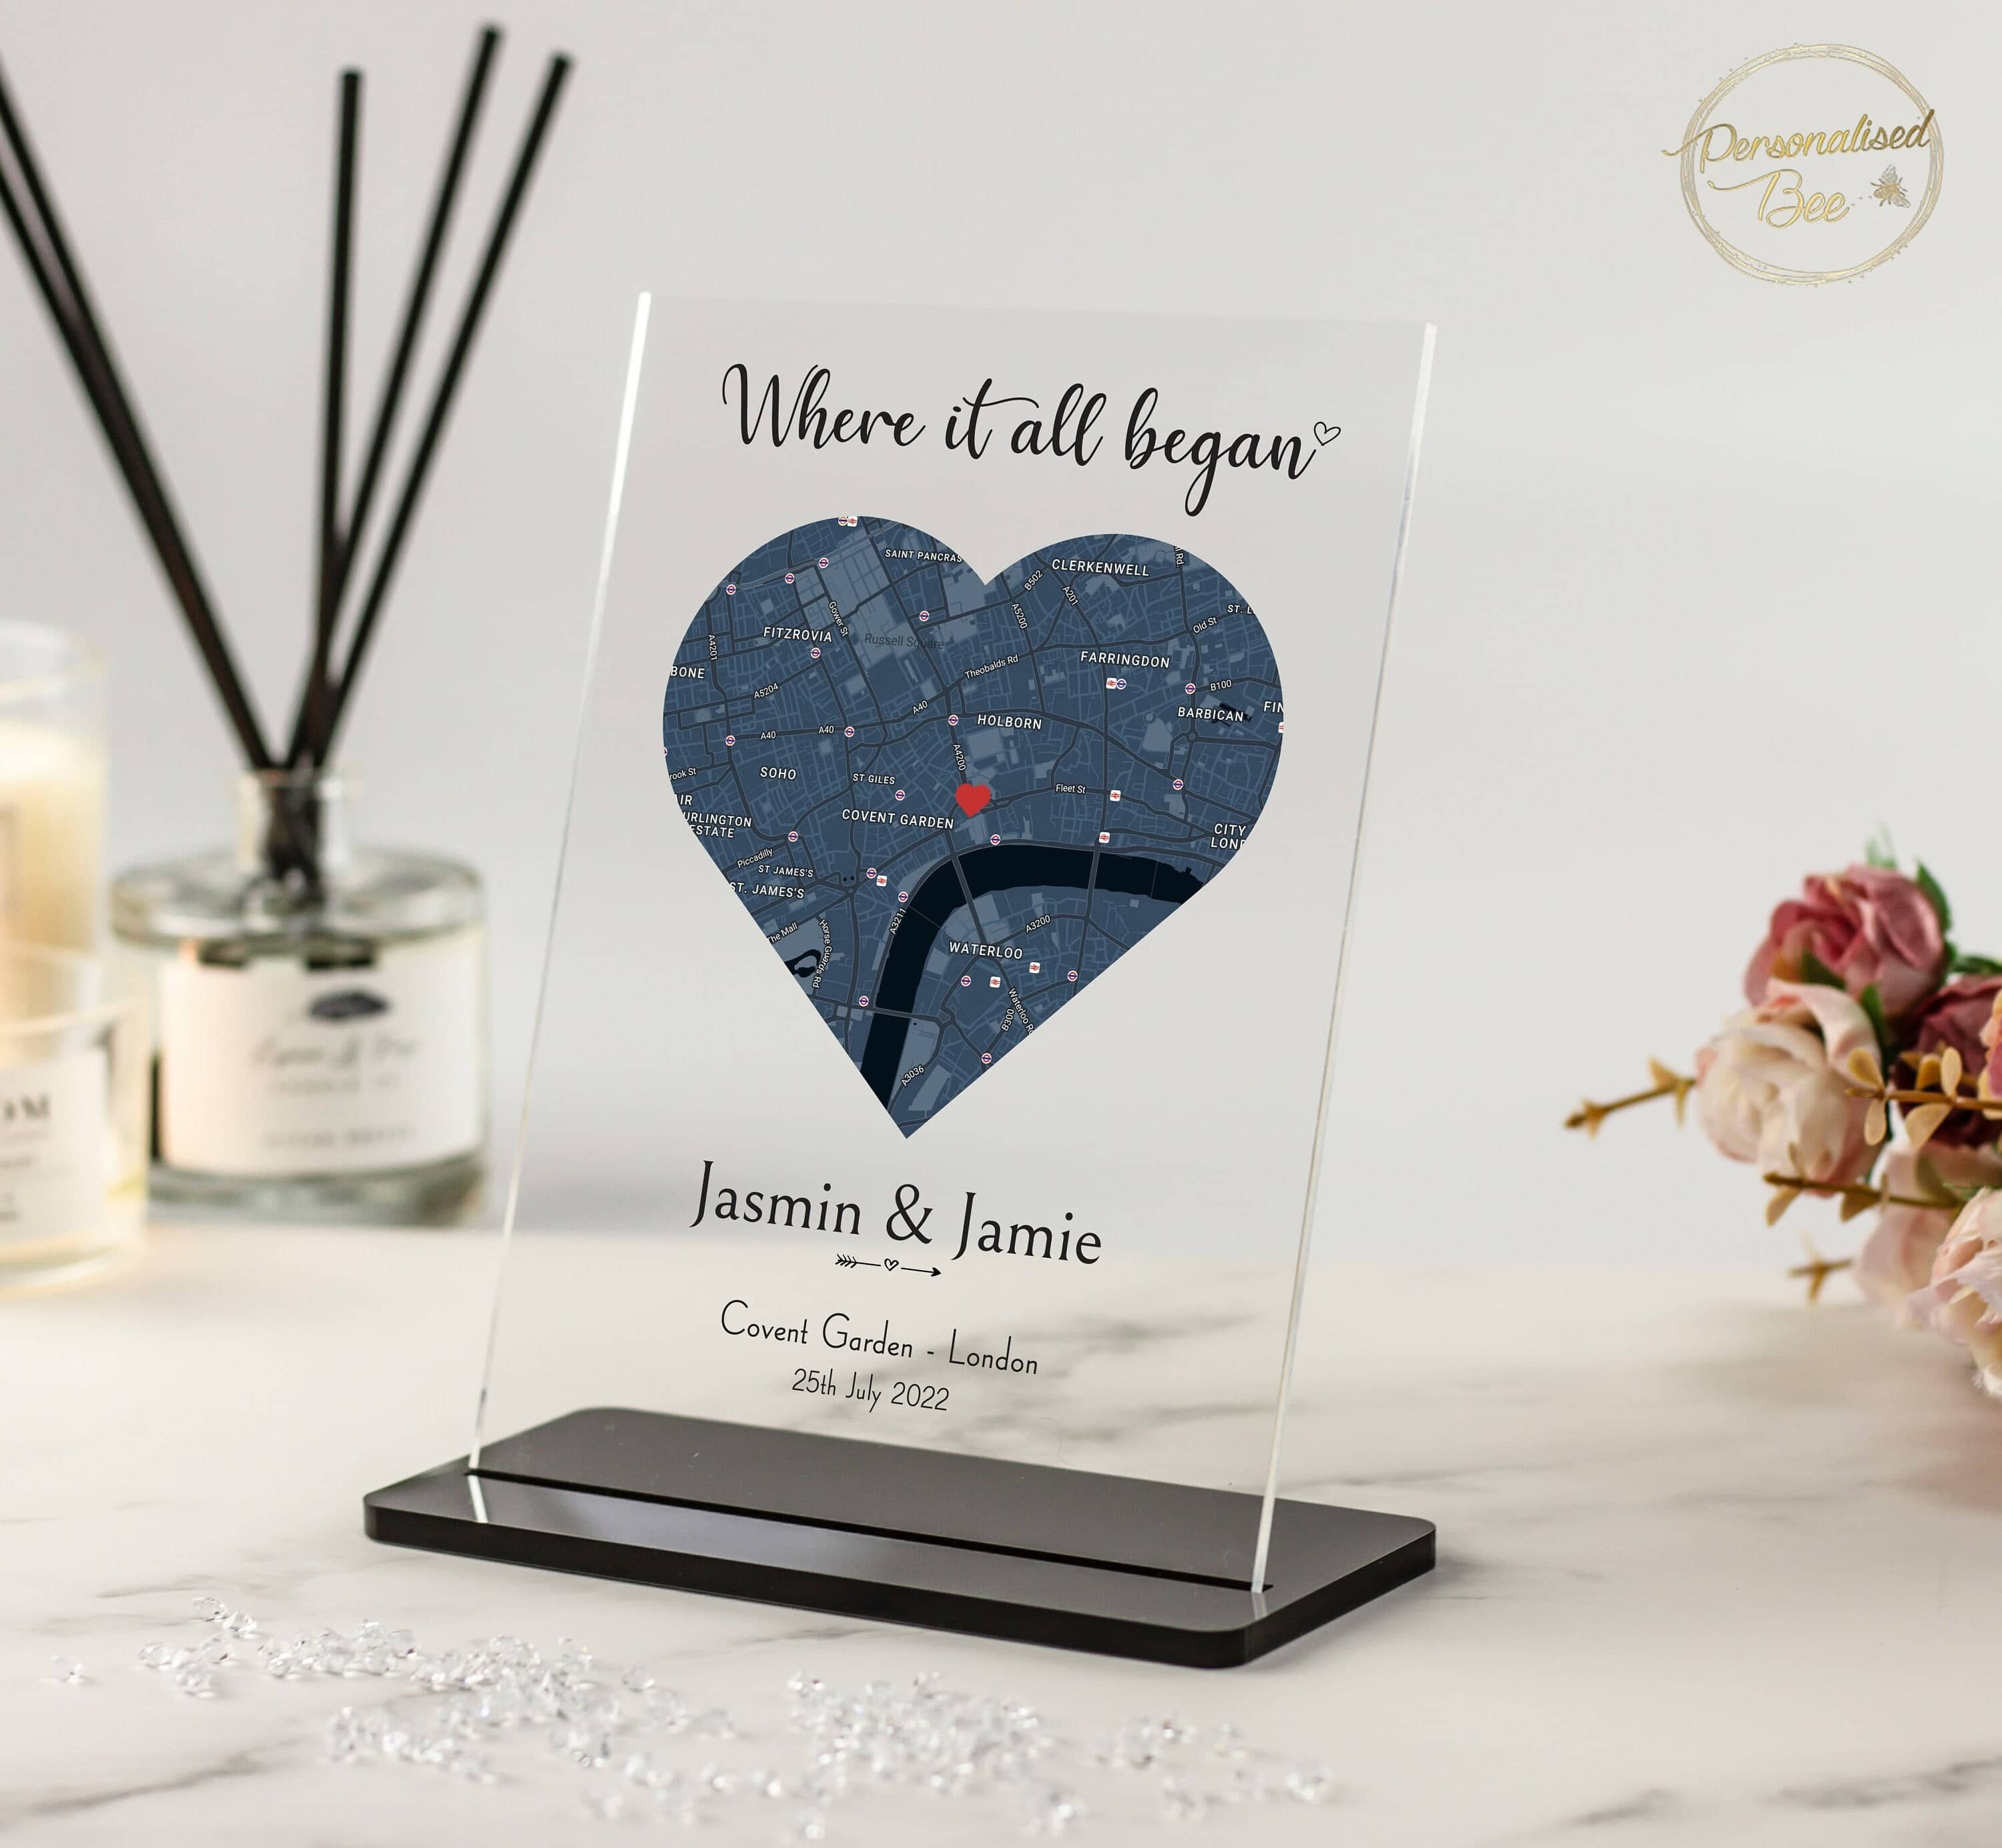 First date Plaque | Anniversary gift